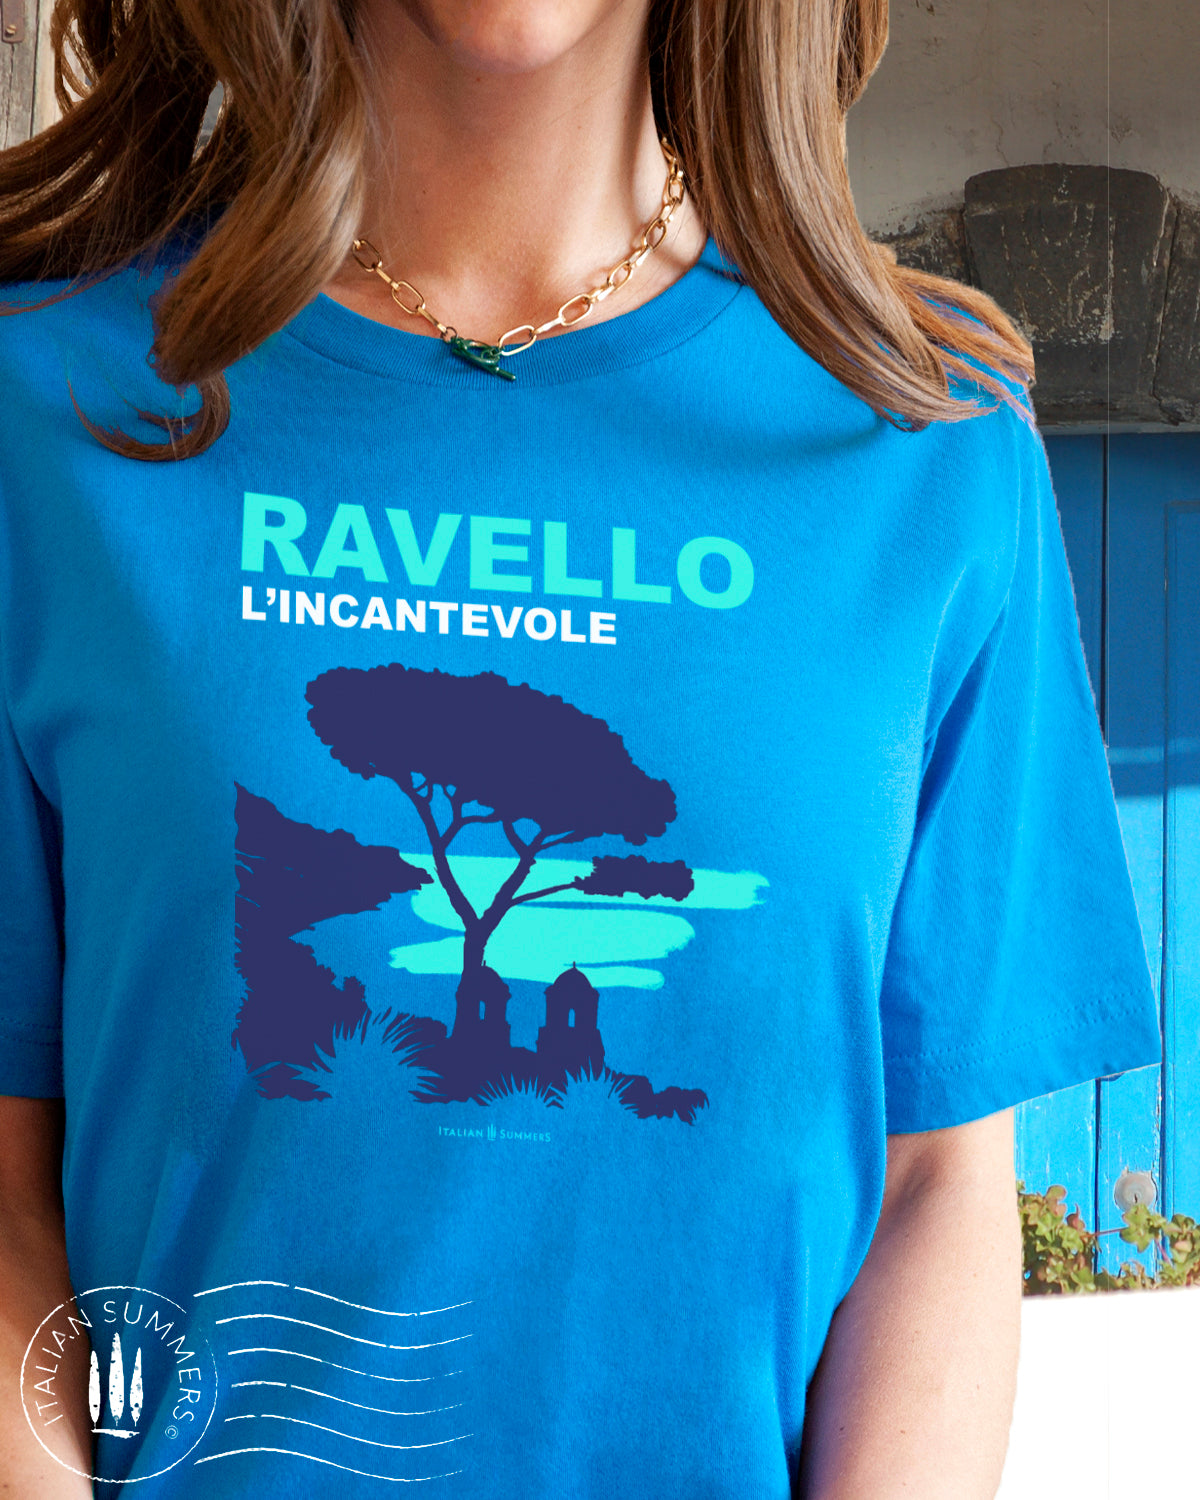 Italy-inspired garment dyed T shirt with a print of the Amalfi Coast location of Ravello with the quote of "Ravello, l'incantevole"  Ravello the enchanting. Made by Italian Summers